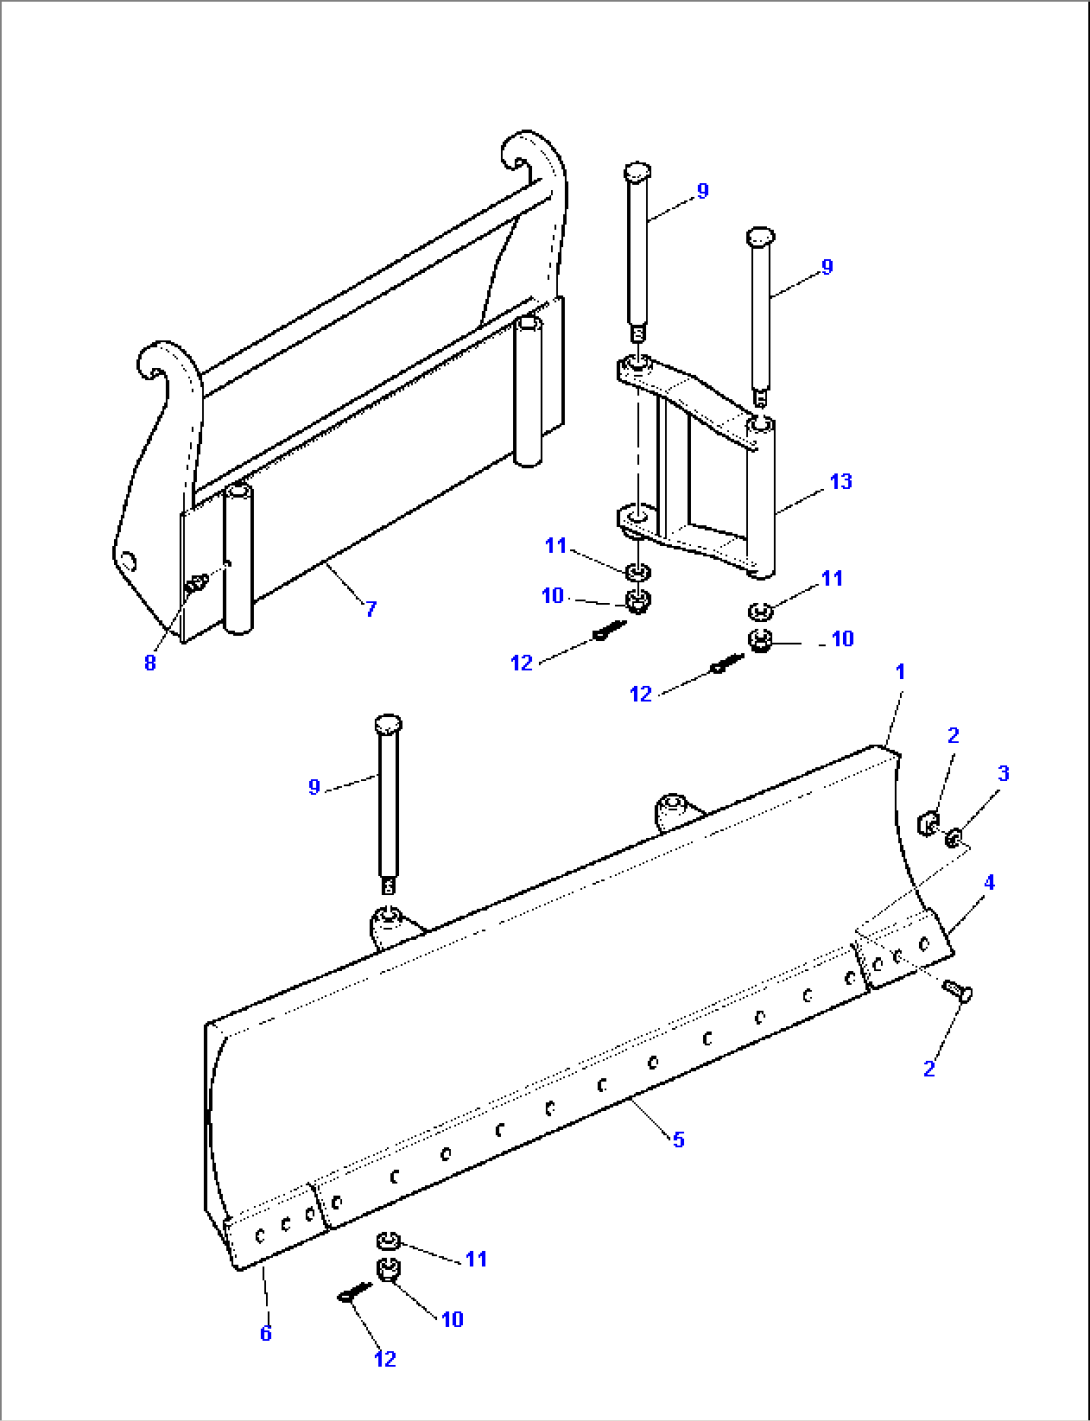 BLADE (WITH MECHANICAL QUICK COUPLING) (1/2)